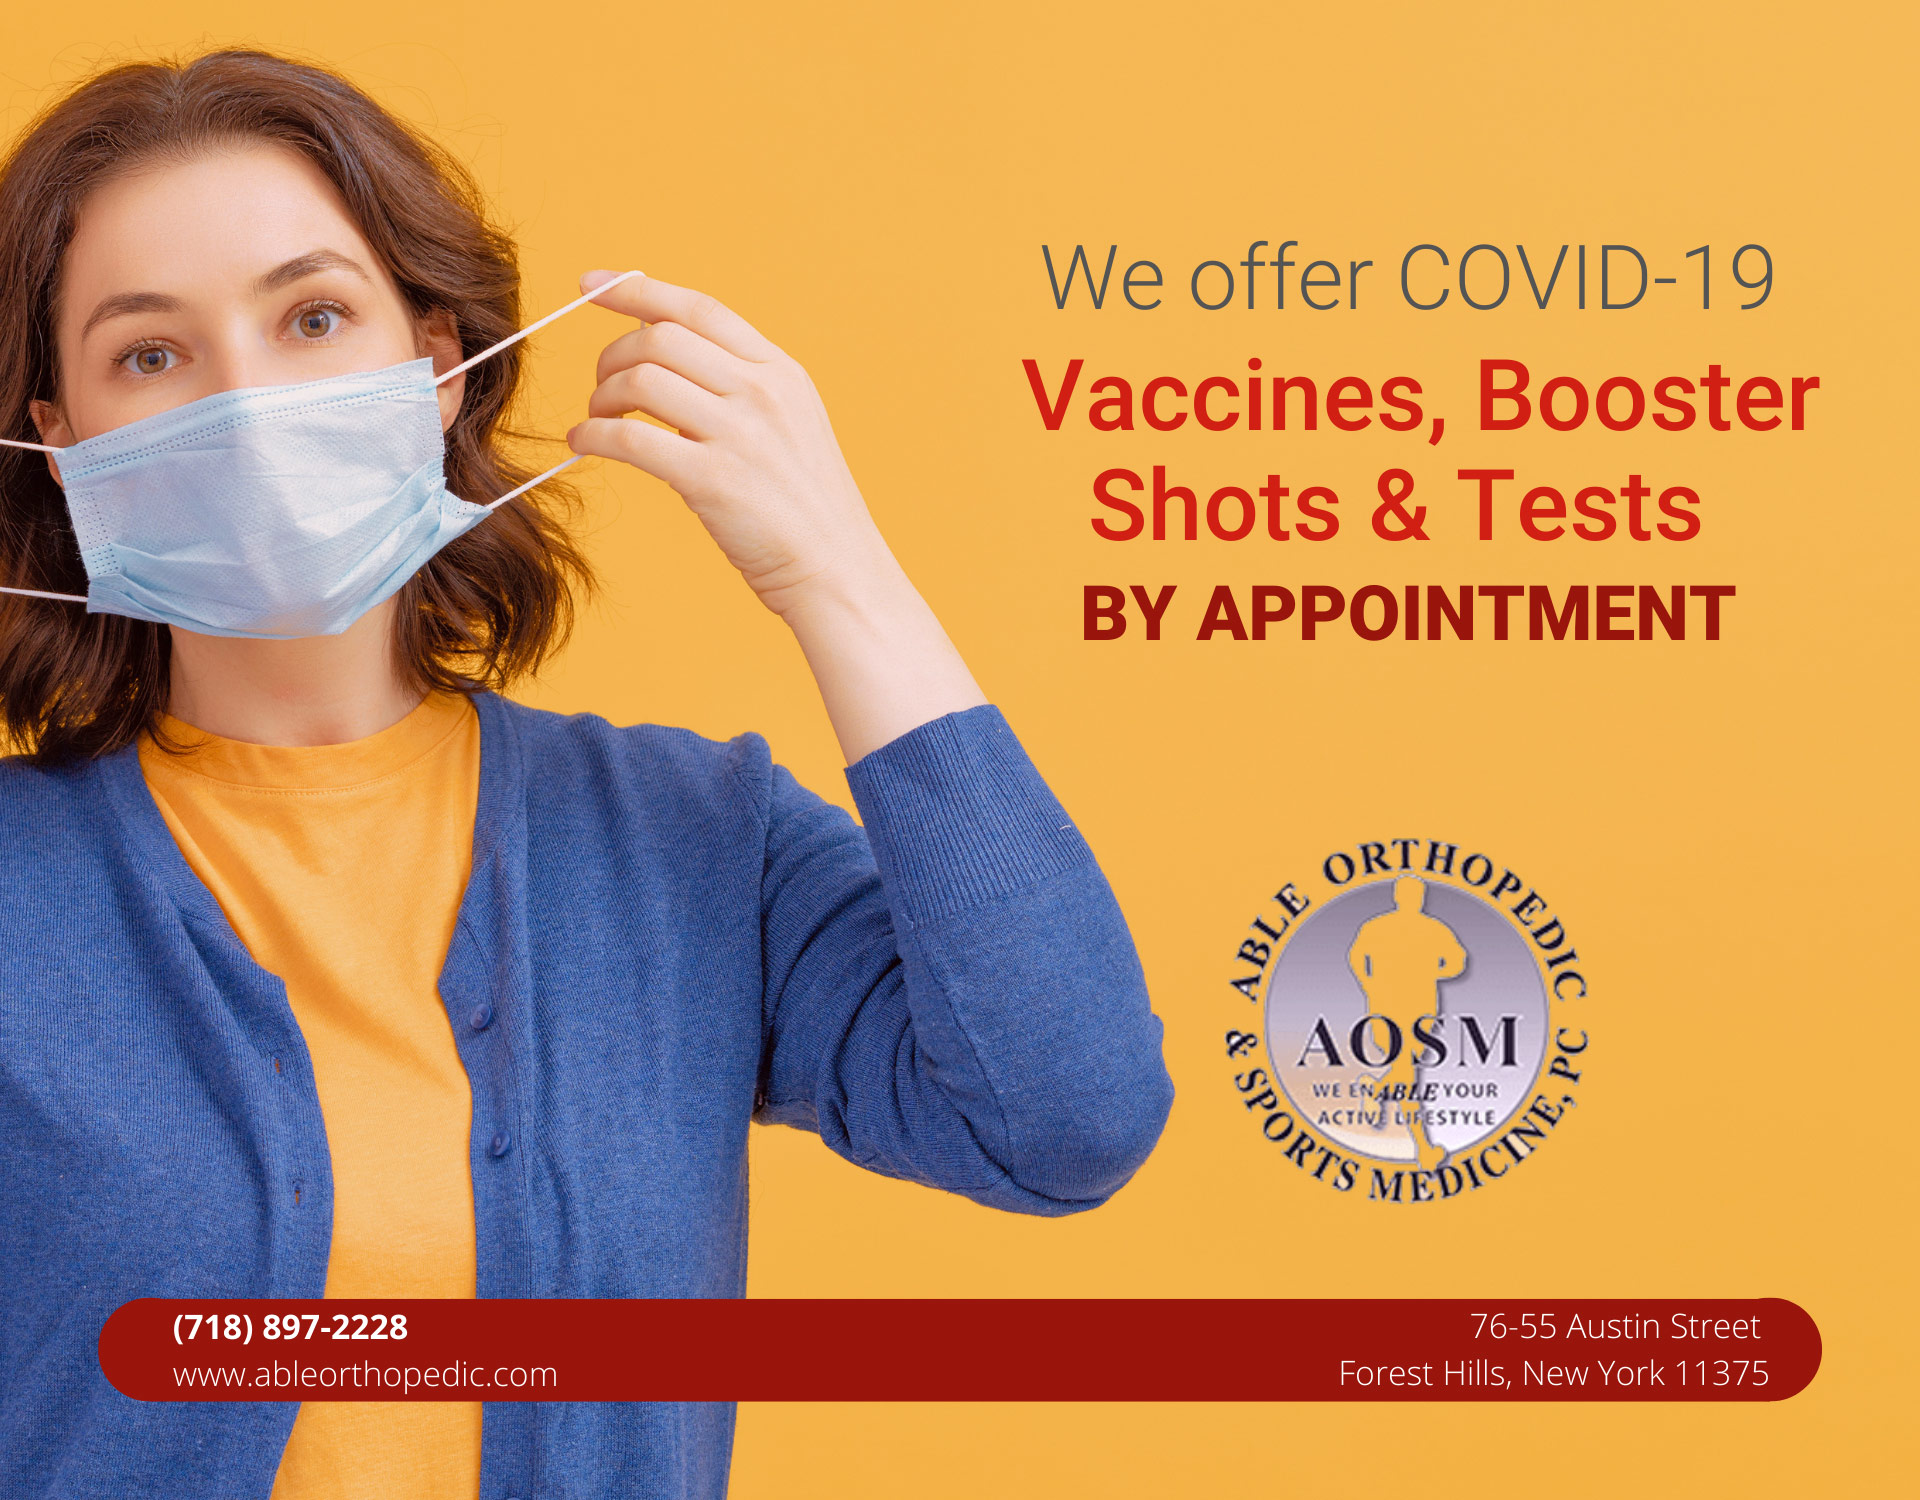 COVID-19 Vaccines, Booster Shots, COVID-19 Tests